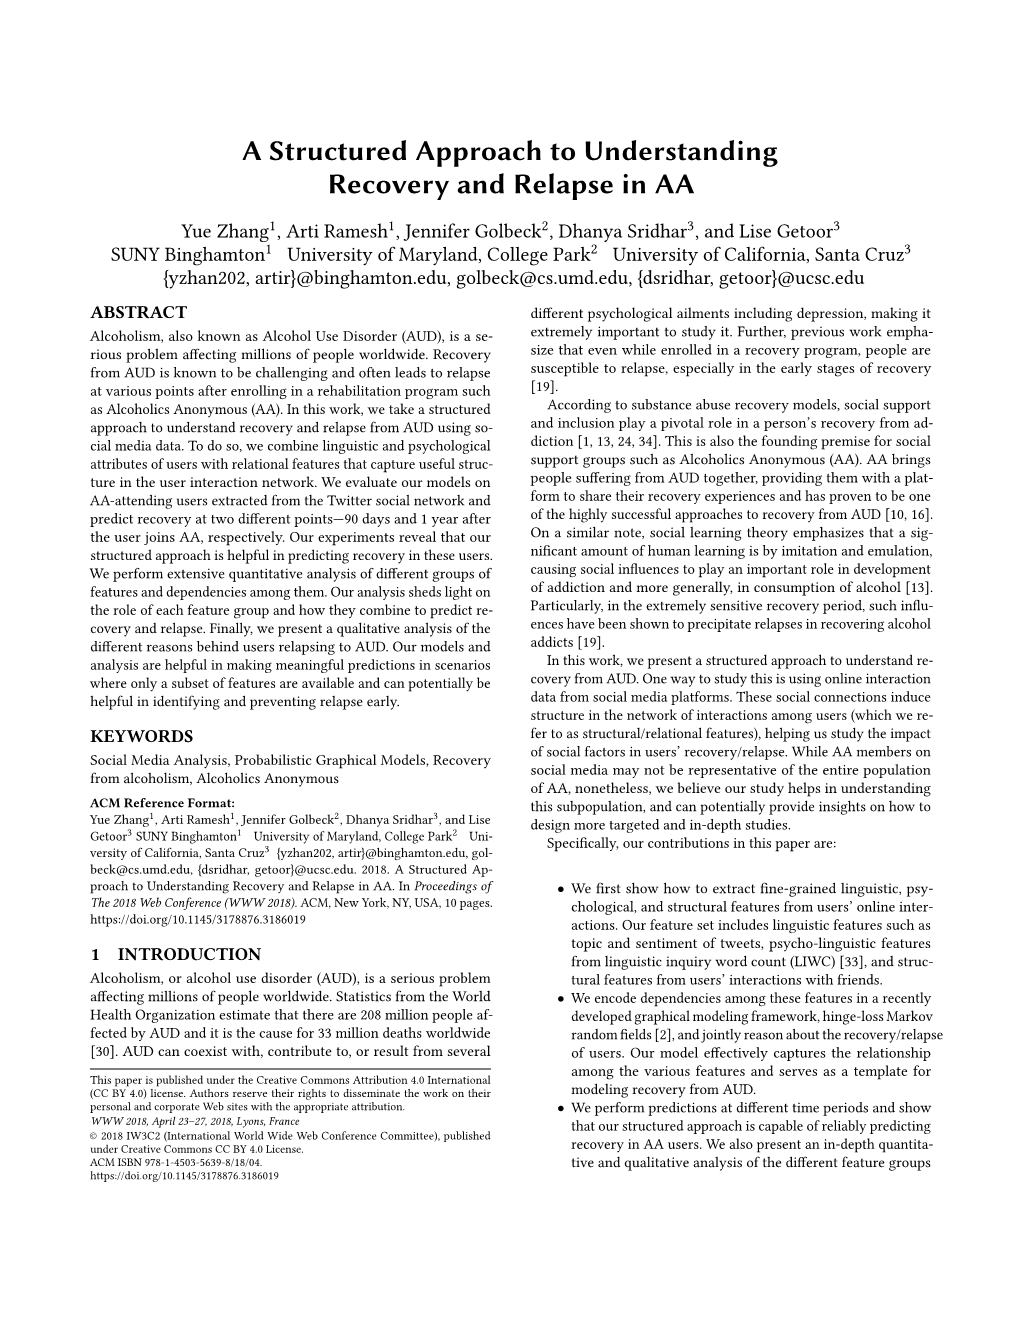 A Structured Approach to Understanding Recovery and Relapse in AA